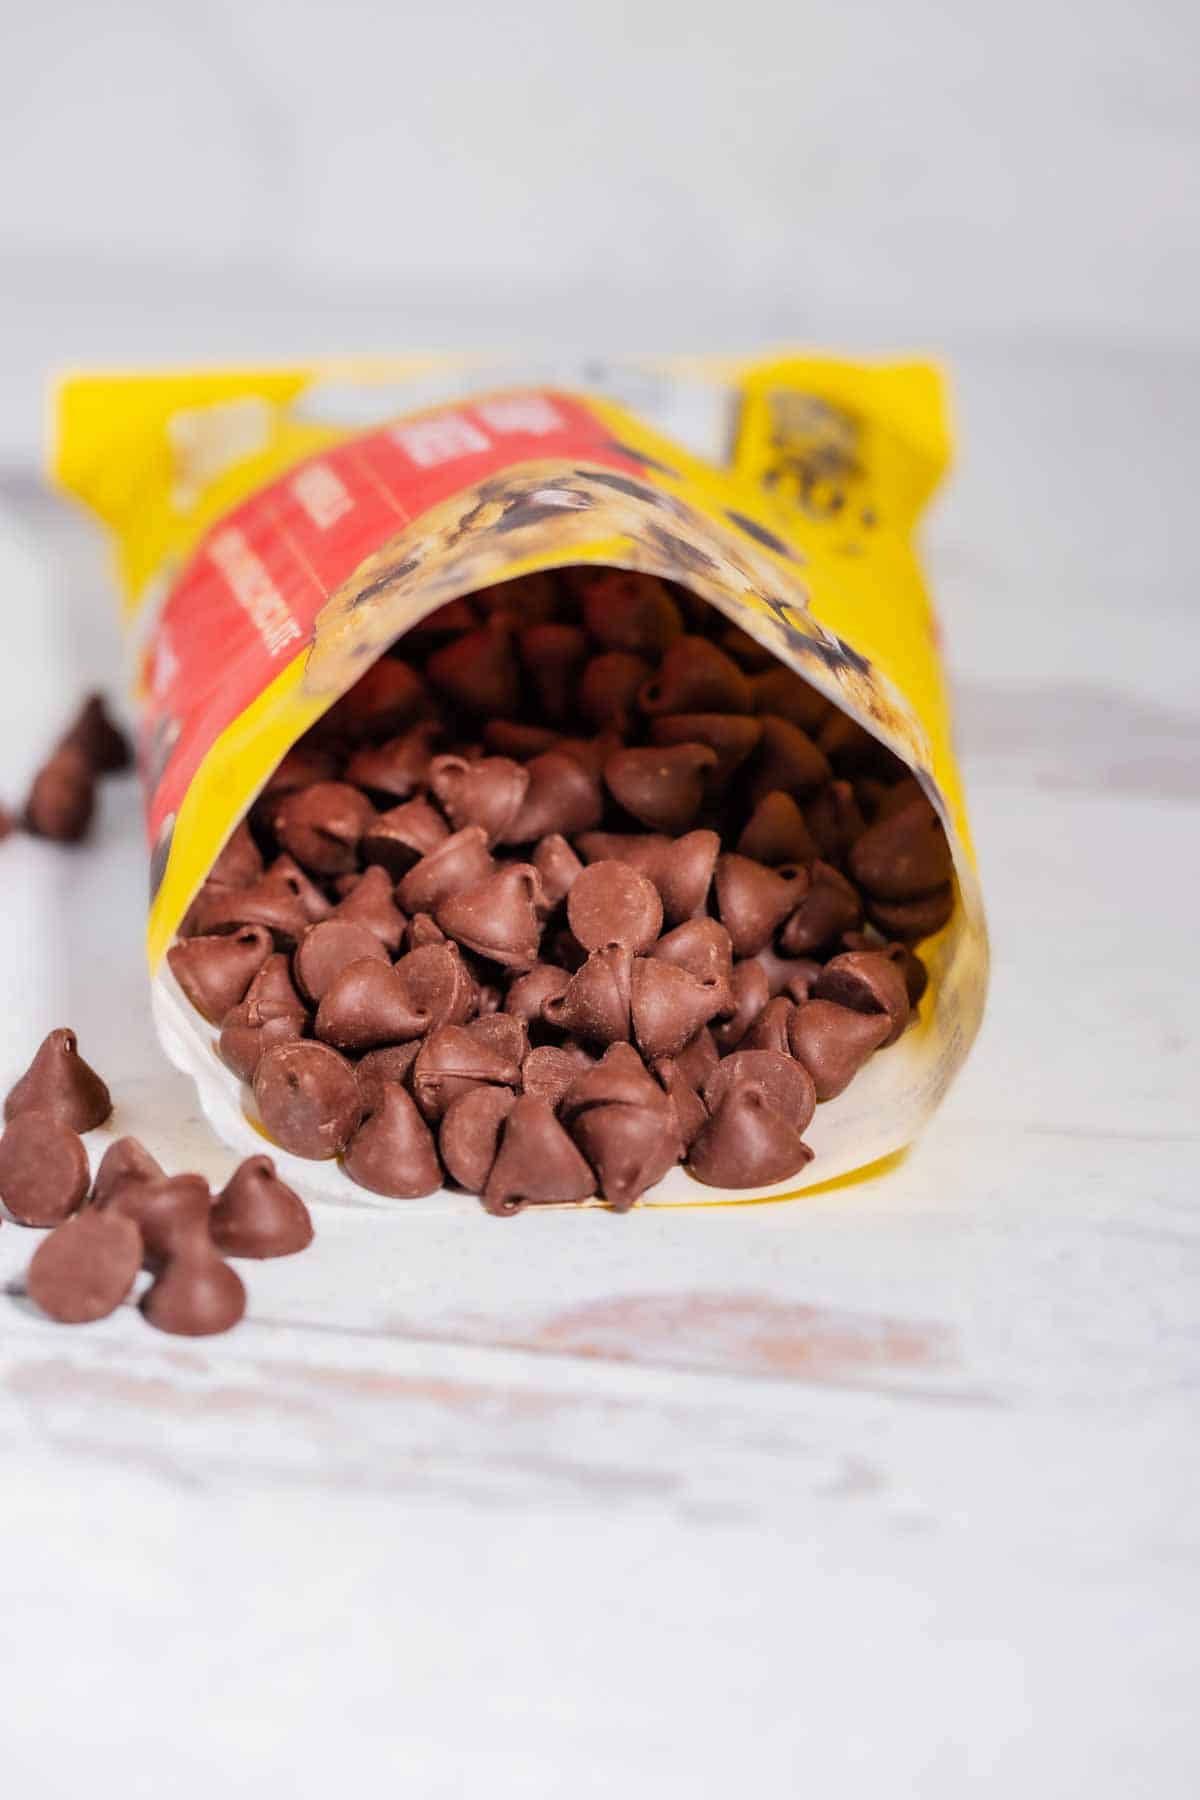 open bag of Nestle Toll House chocolate chips